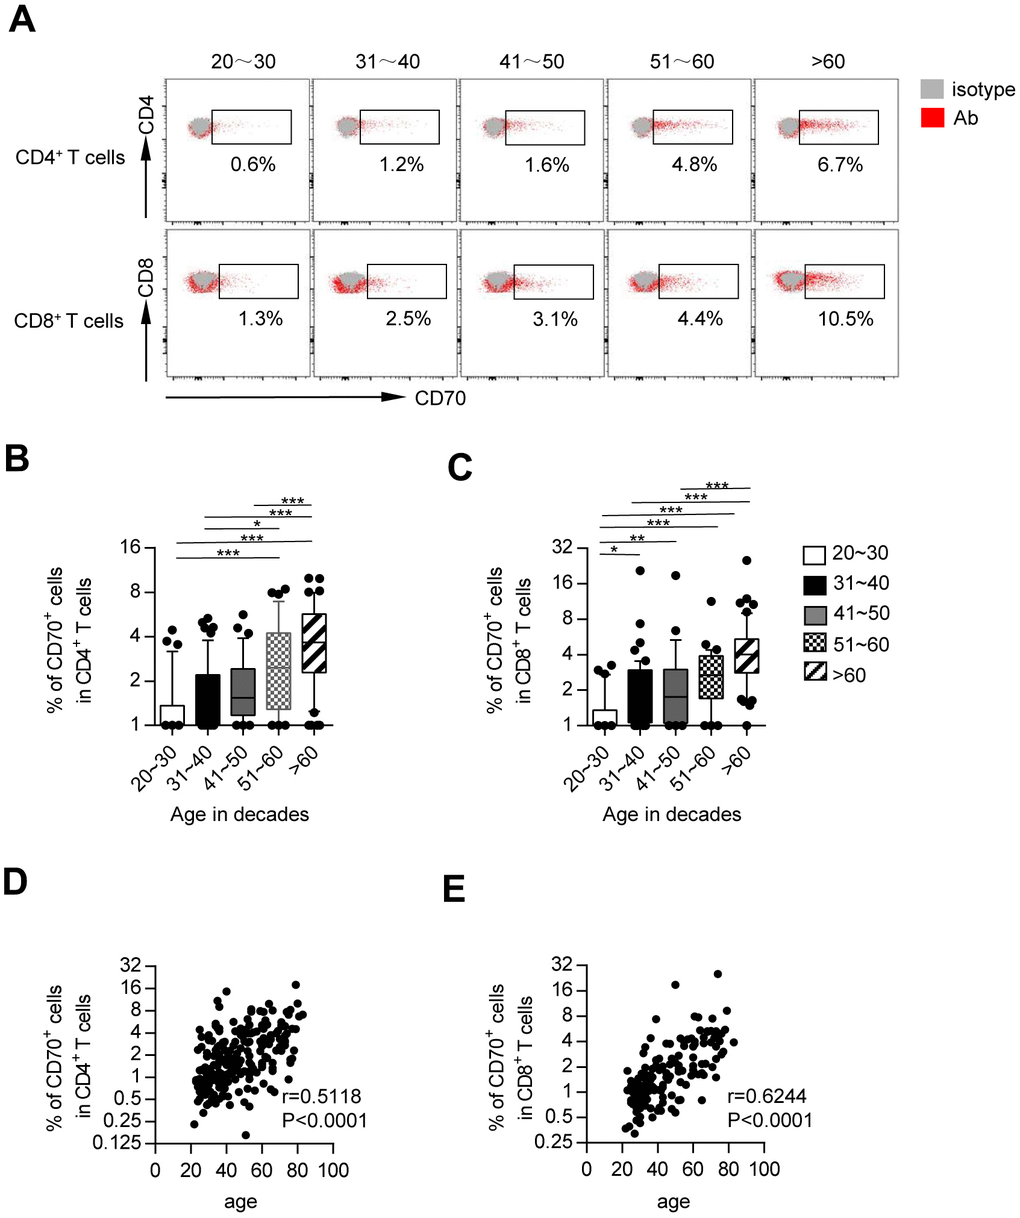 CD70-expressing T cells accumulate with age. Flow cytometry analysis of CD70 expression on PBMCs from healthy controls of different ages. (A) Representative flow cytometric plots show the expression of CD70 gated on CD4+ and CD8+ T cells from five healthy donors in different age groups. (B–C) Box plots of the frequencies of CD70+ cells among CD4+ and CD8+ T cells from healthy donors in different age groups (n = 34-56 in each group). Values given are the median frequencies ± the interquartile range and 10 and 90 percentile whiskers. The p-values were obtained by Kruskal-Wallis test followed by Dunn’s multiple comparisons test. (D–E) Correlation analysis of age and surface CD70 expression on CD4+ T cells (D) and CD8+ T cells (E) from all healthy individuals. Spearman’s non-parametric test was used to test for correlations. *p p p 